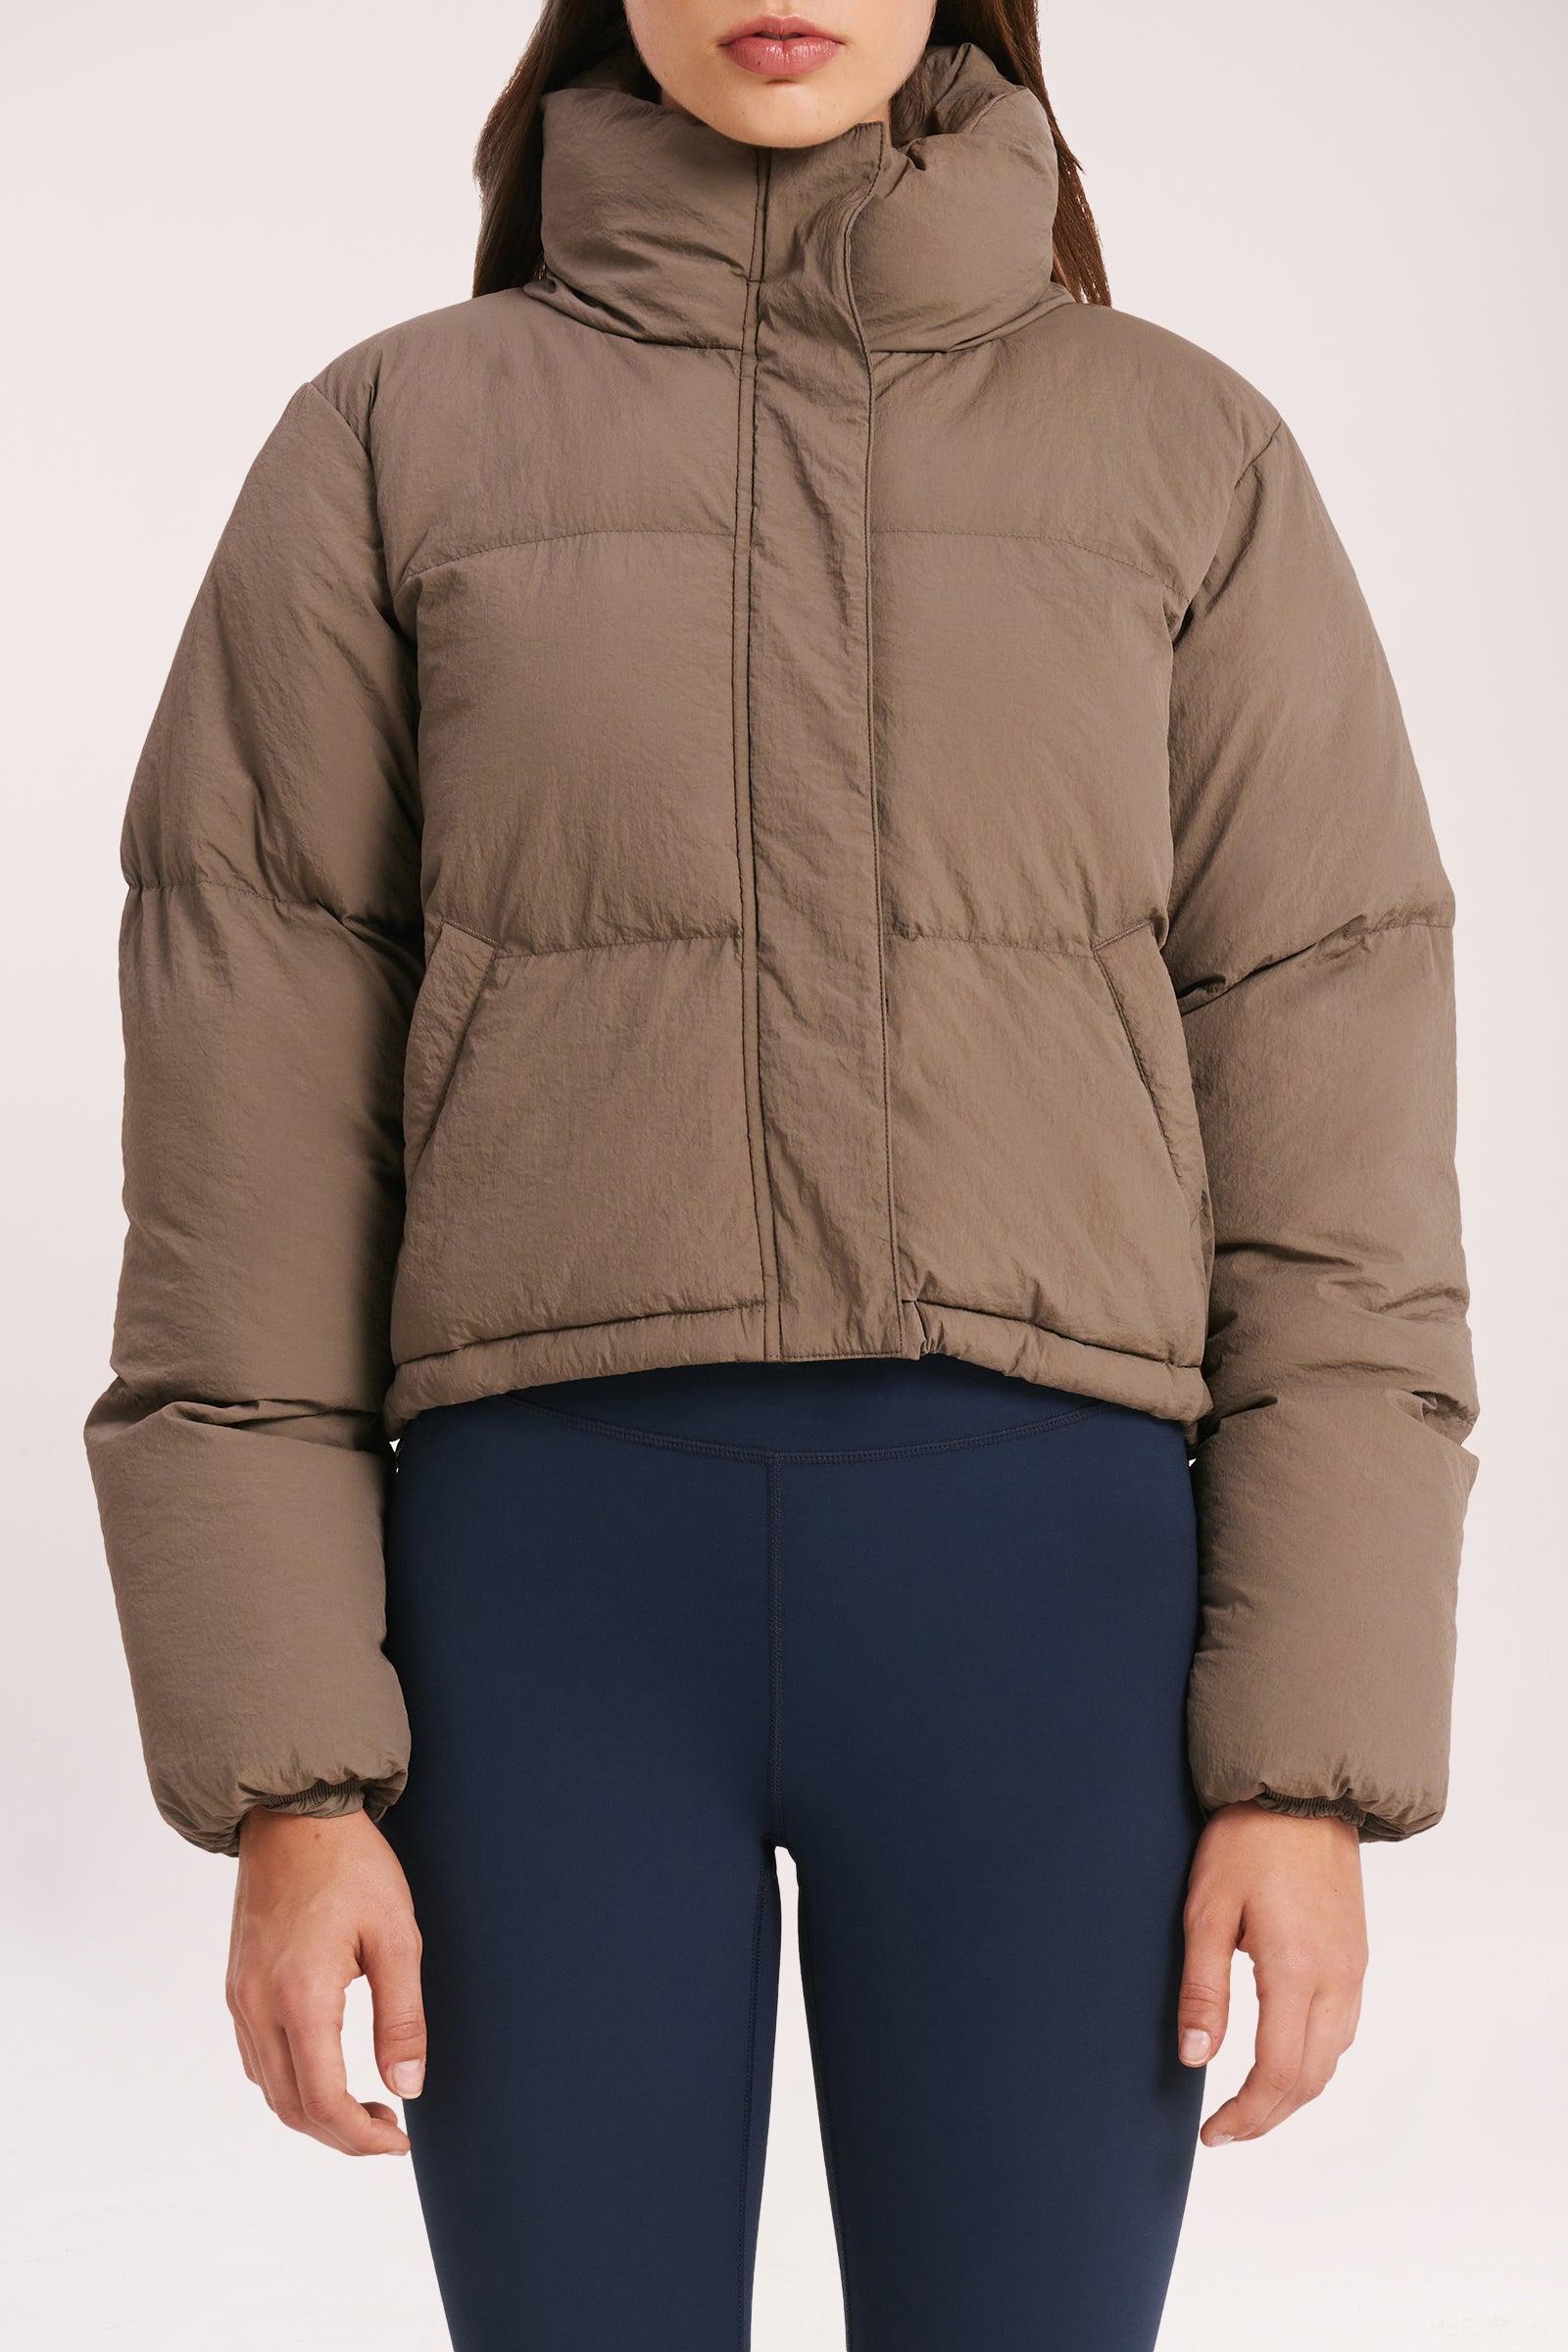 Nude Lucy Topher Puffer Jacket in Ash